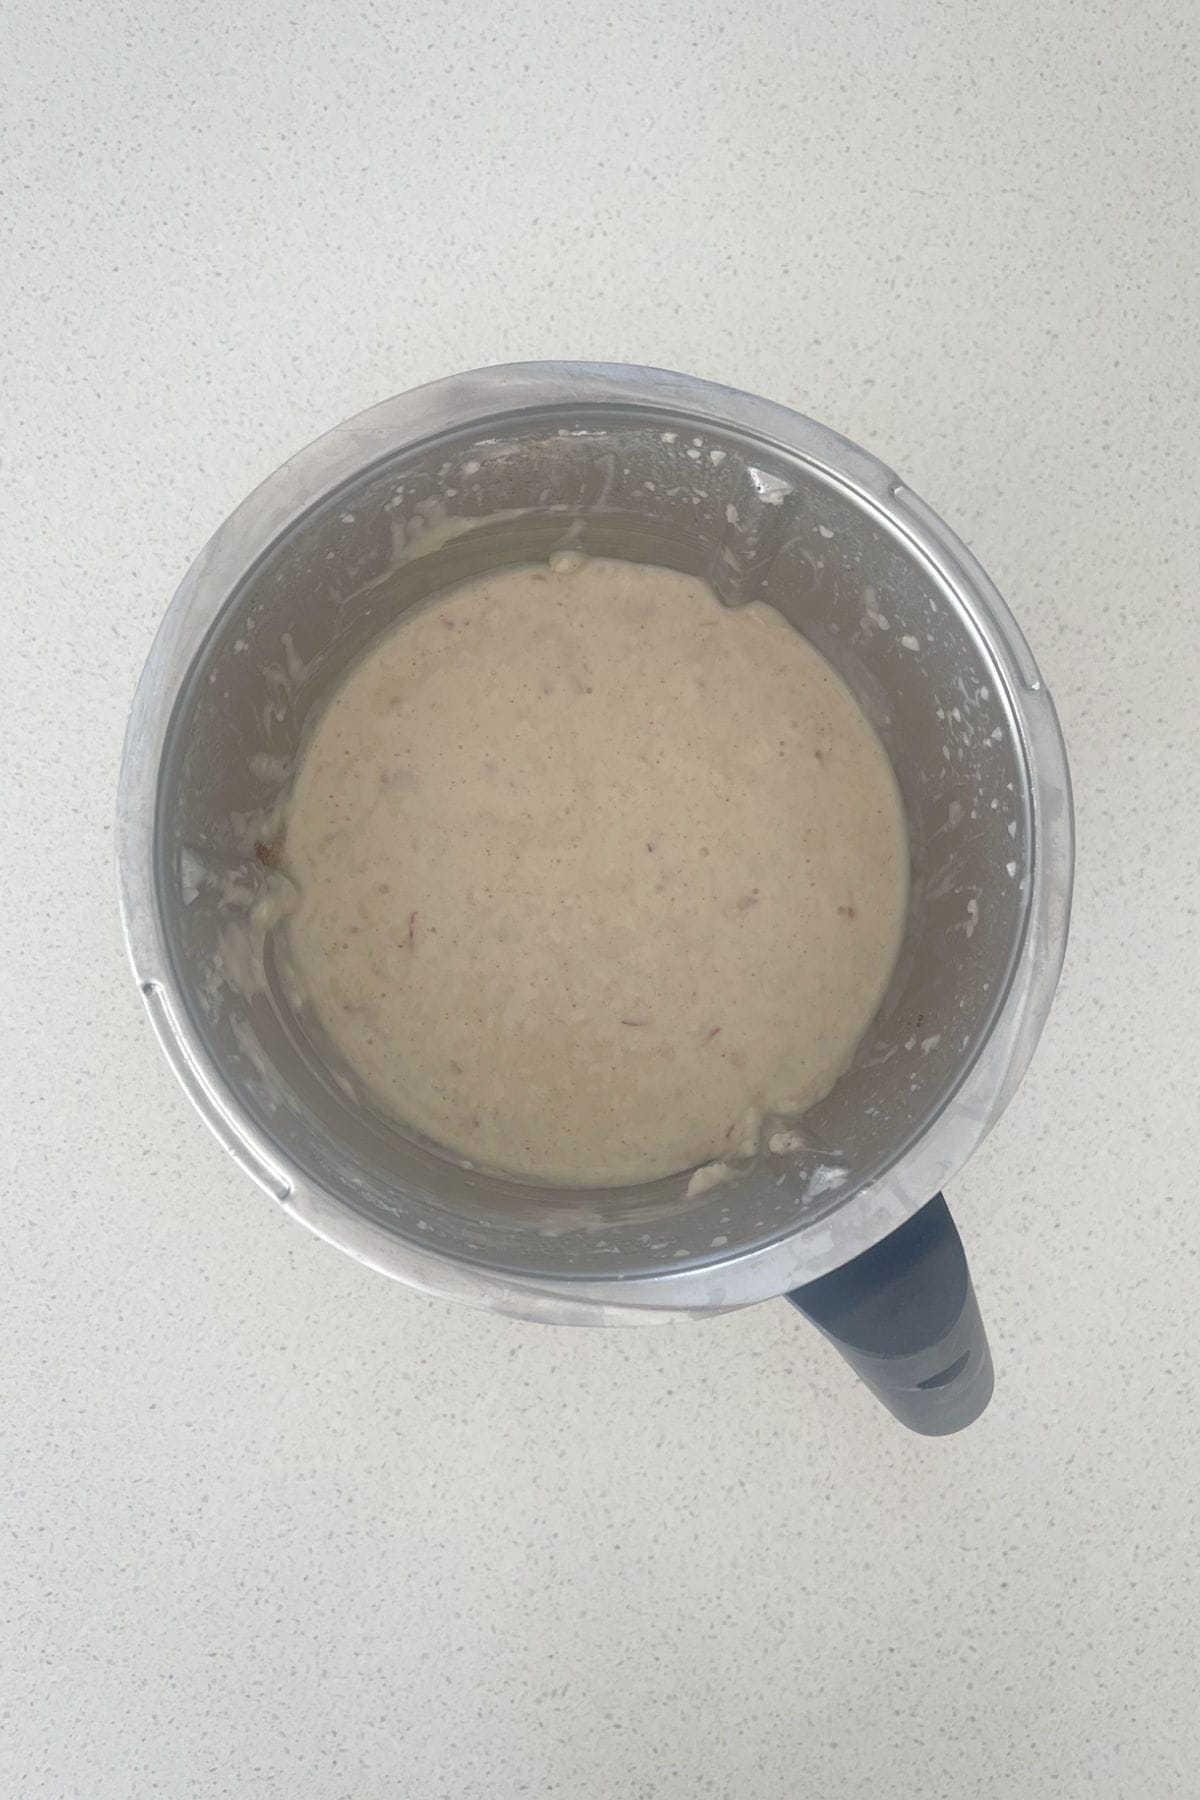 Apple Muffin batter in a thermomix bowl.